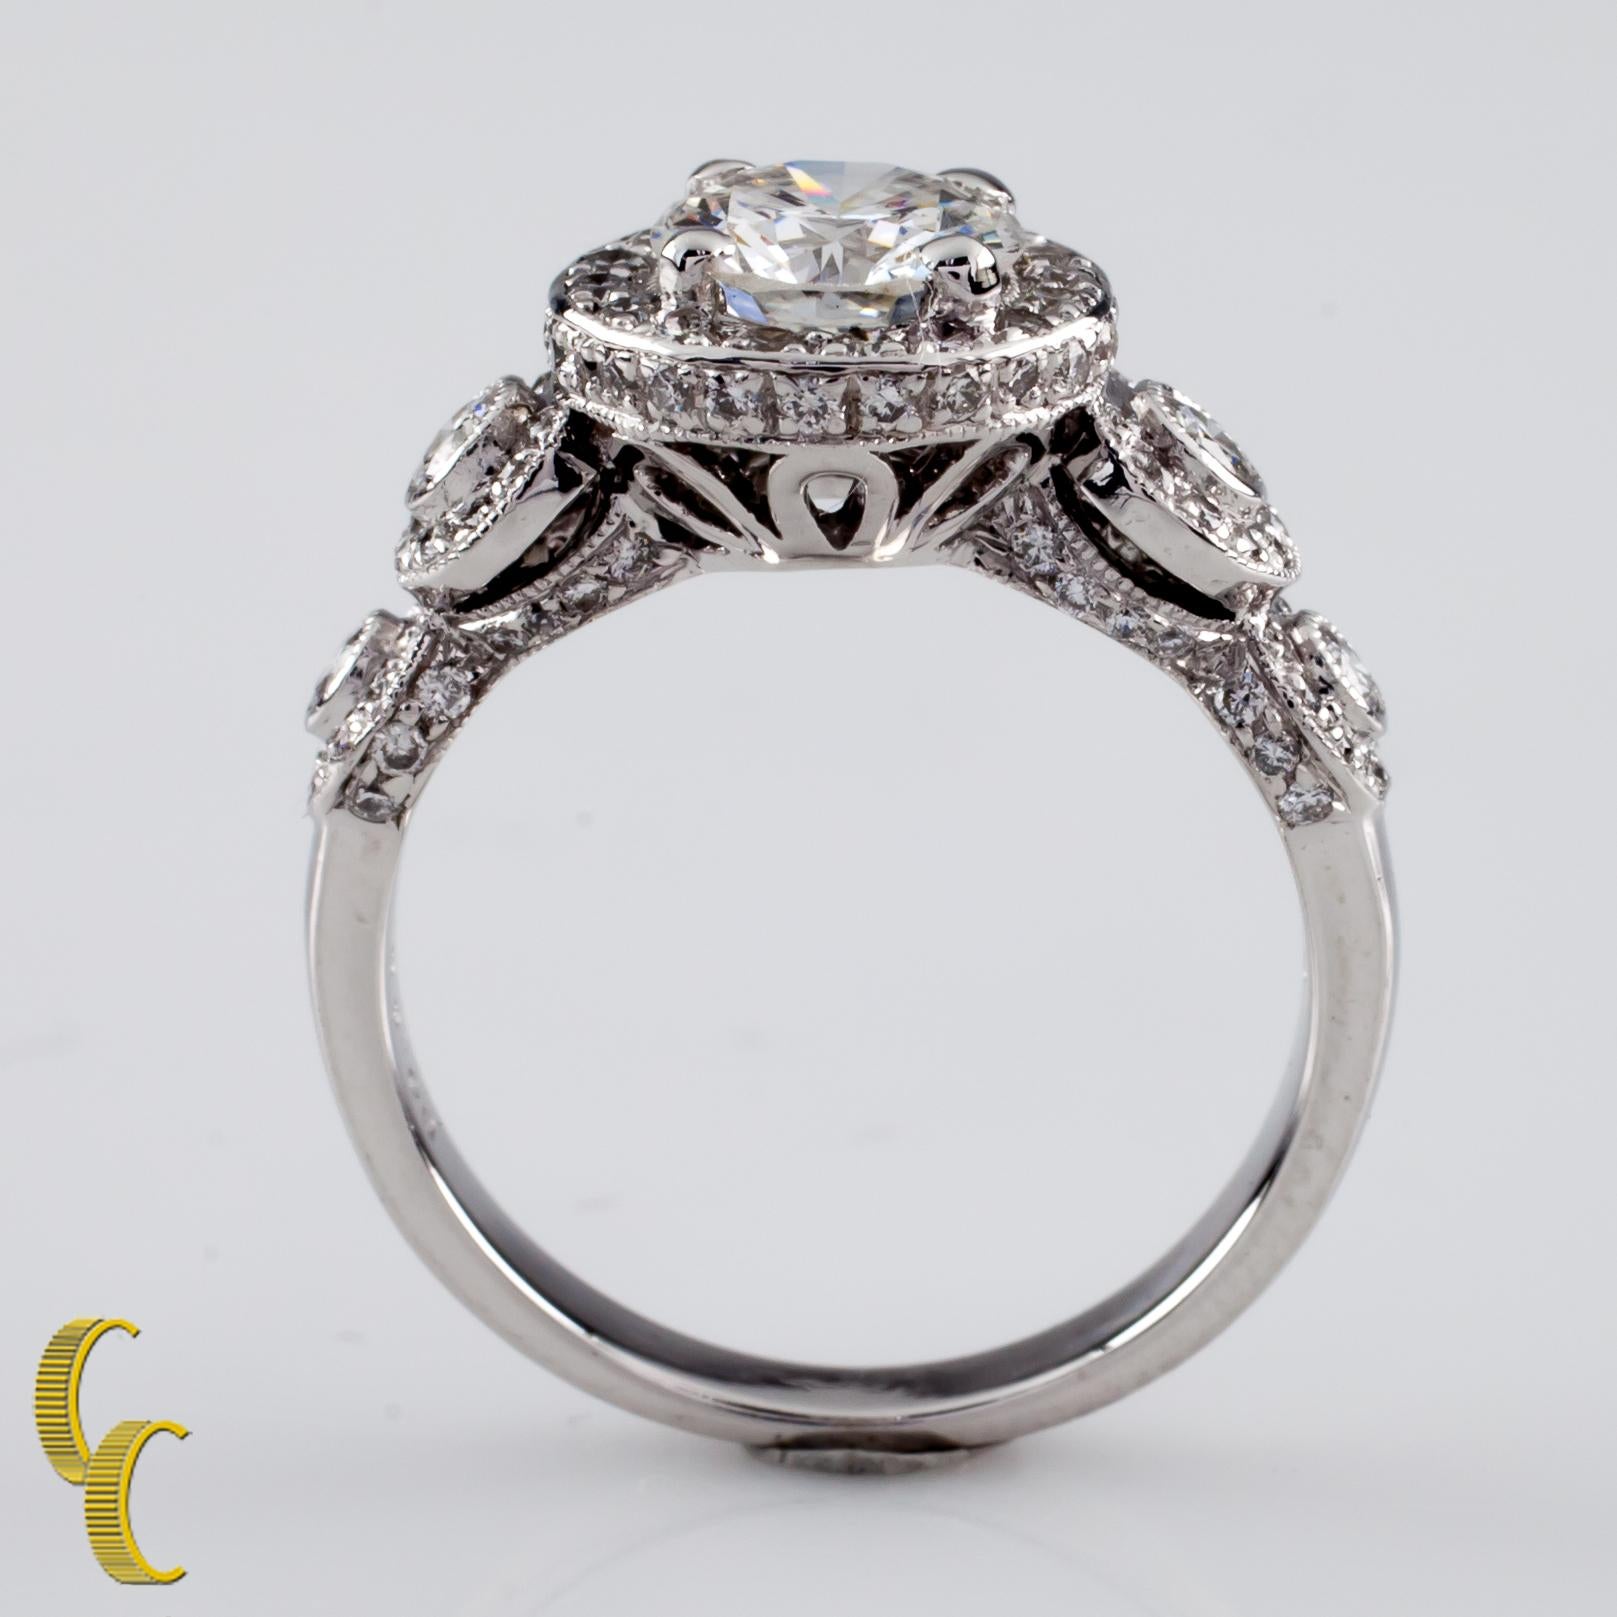 1.77 Carat Round Brilliant Diamond 18 Karat White Gold Engagement Ring In Good Condition For Sale In Sherman Oaks, CA